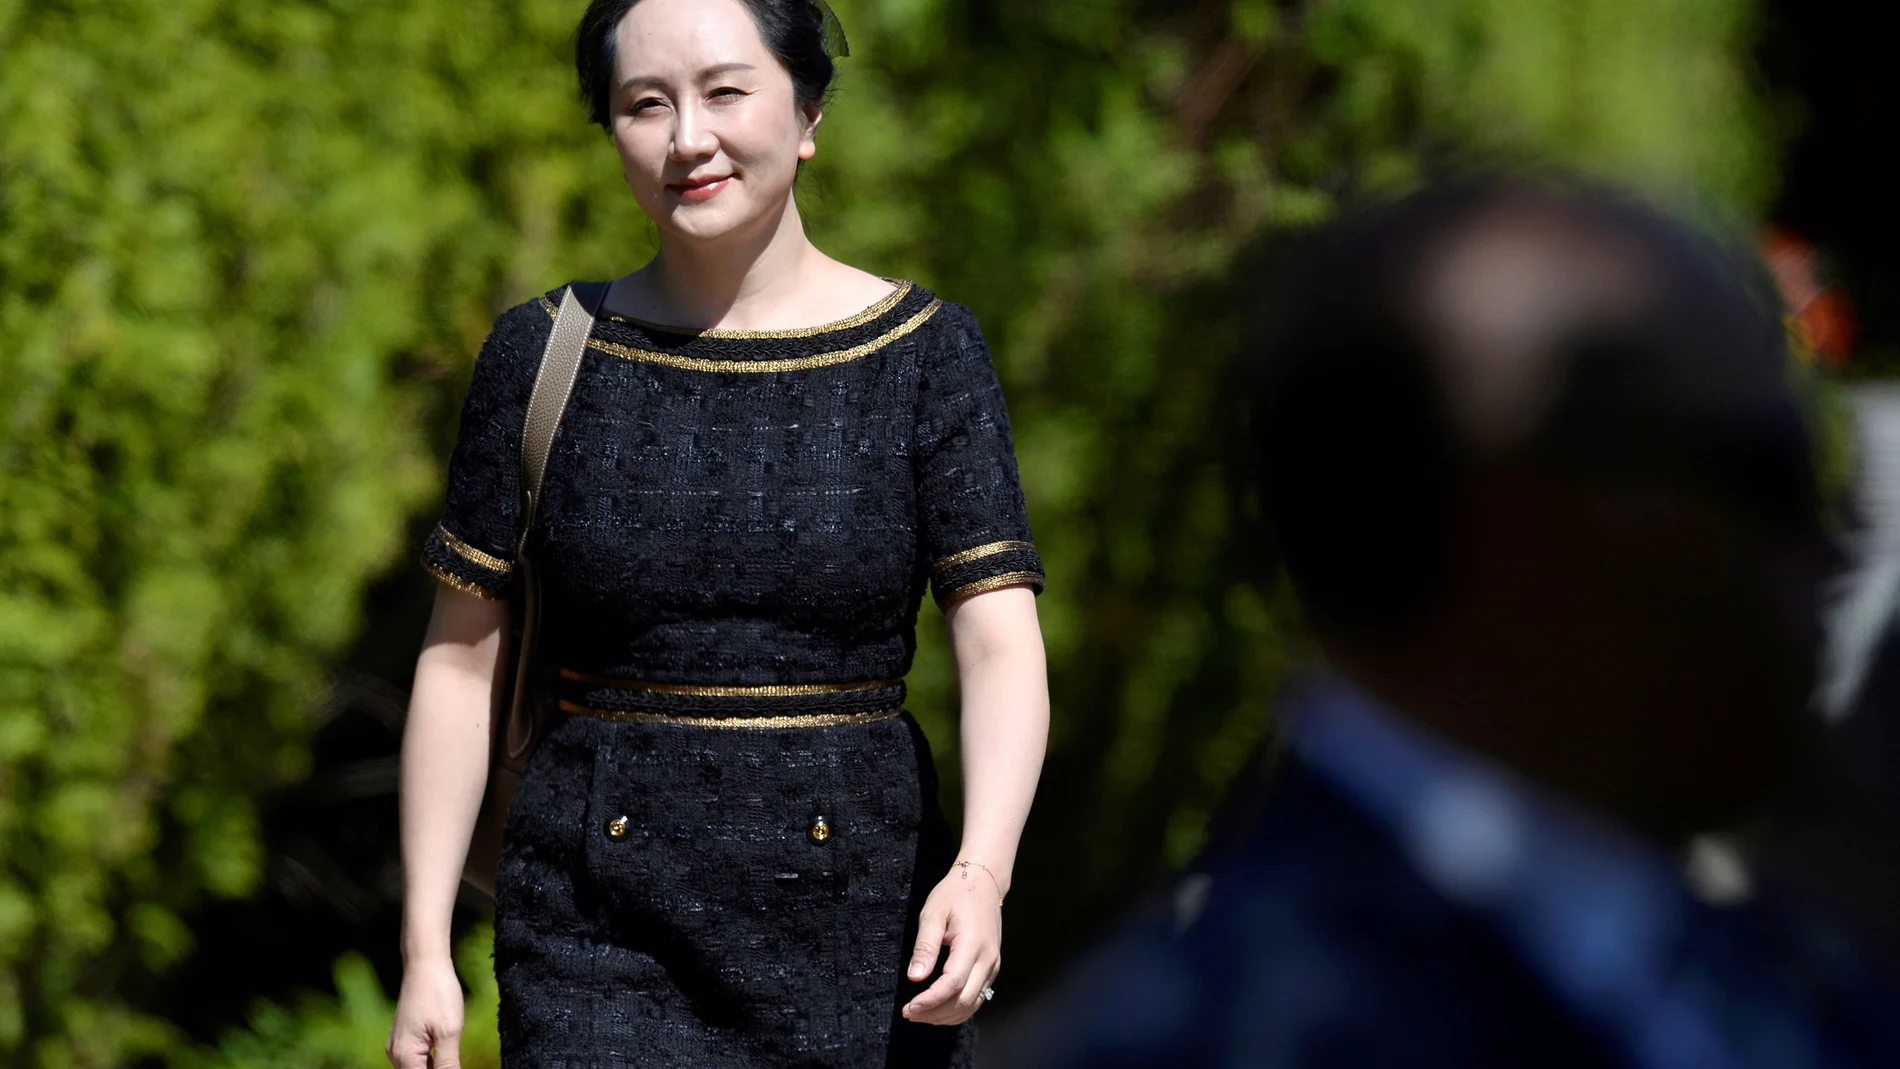 Huawei Technologies Chief Financial Officer Meng Wanzhou leaves her home to attend a court hearing in Vancouver